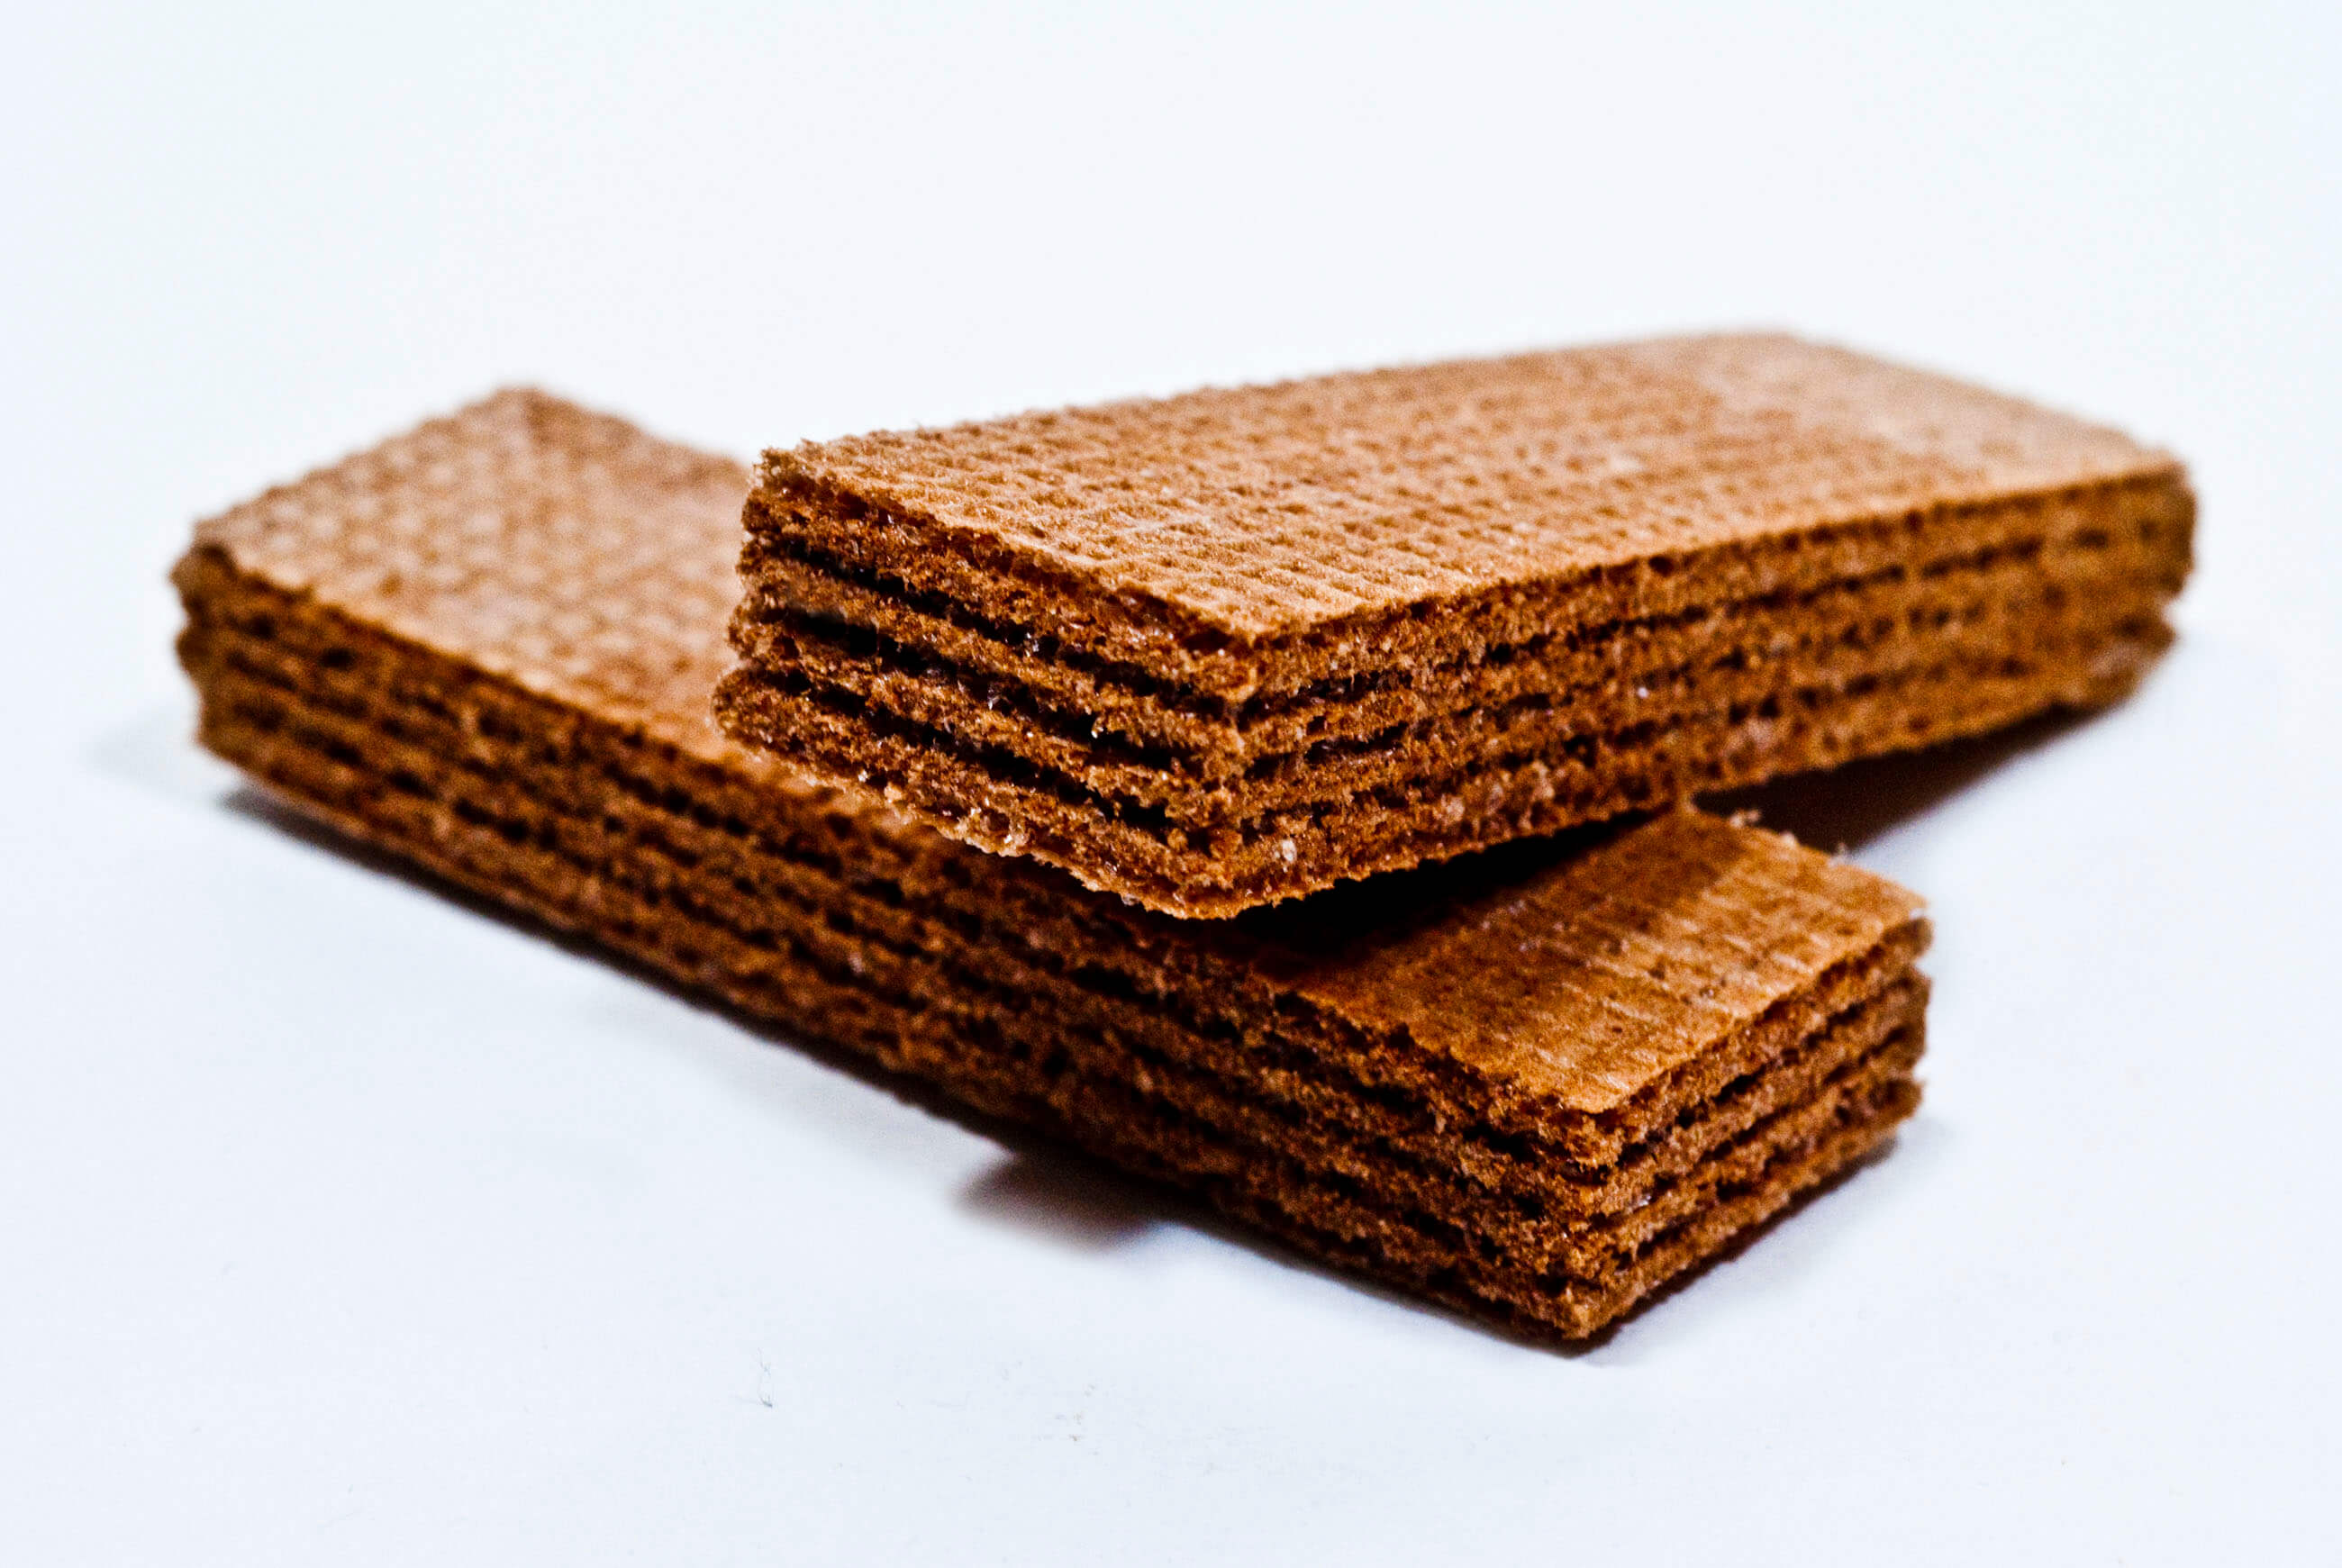 National Chocolate Wafer Day